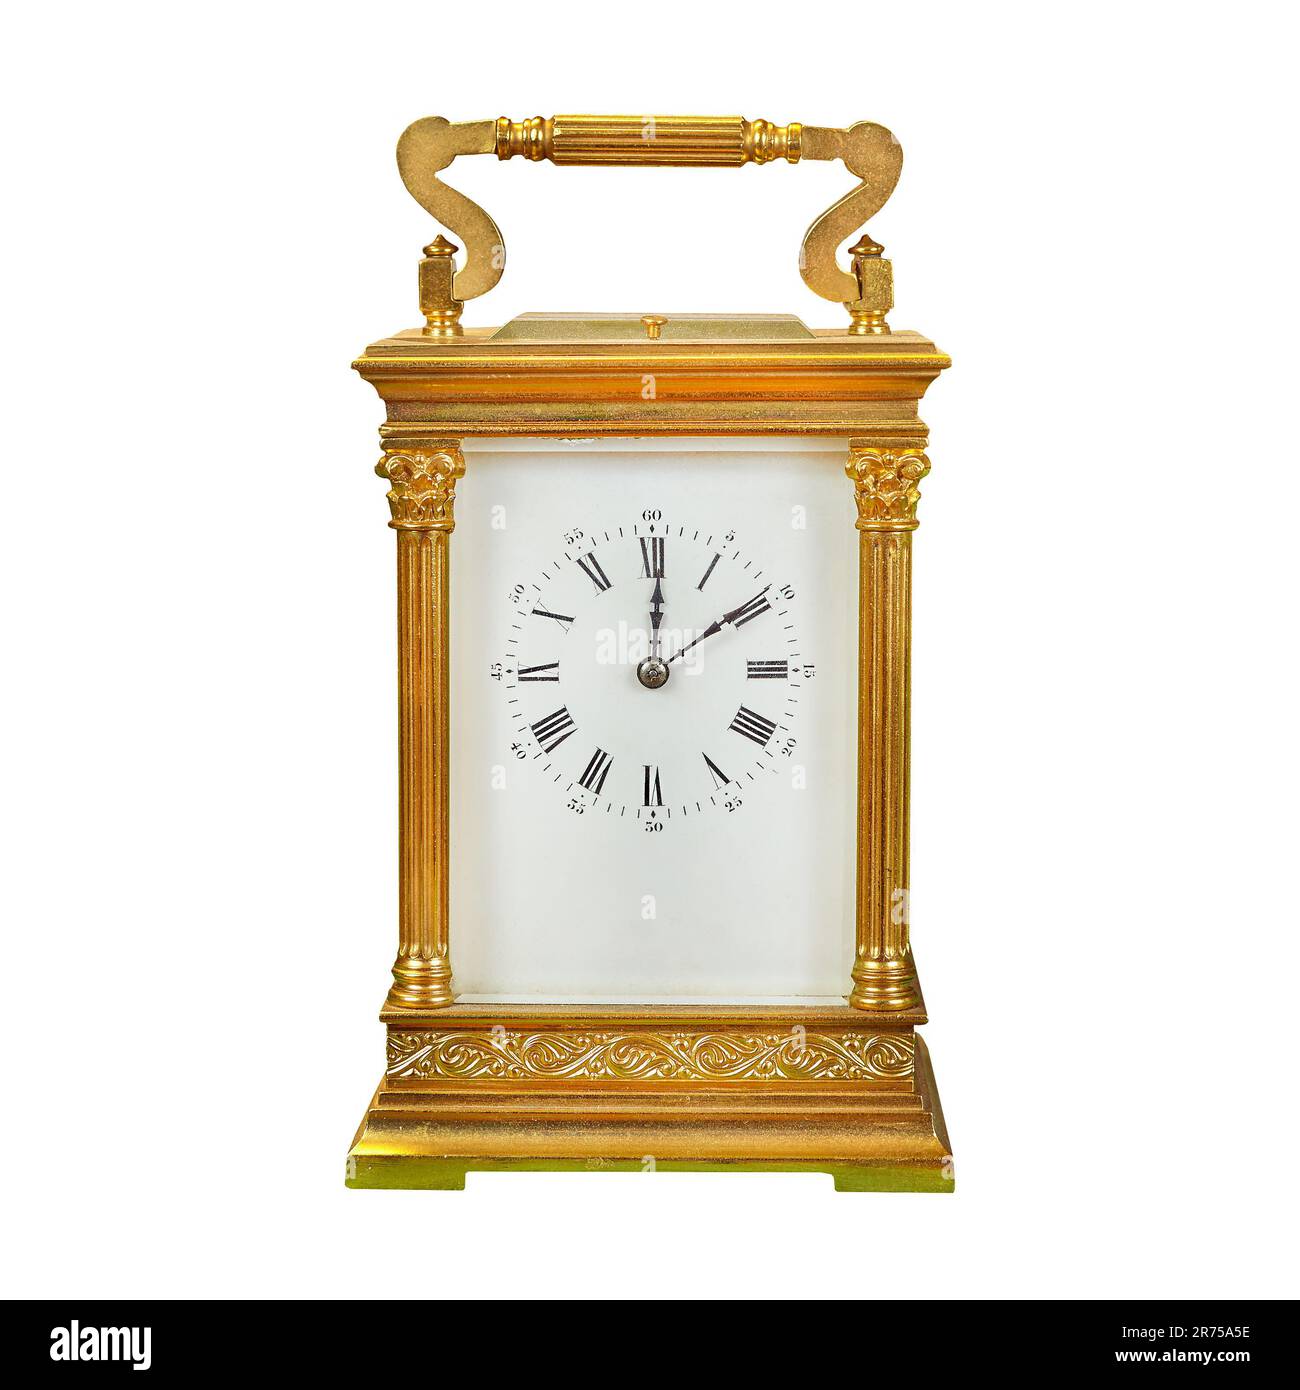 Authentic ancient gold plated small table clock isolated on a white background Stock Photo